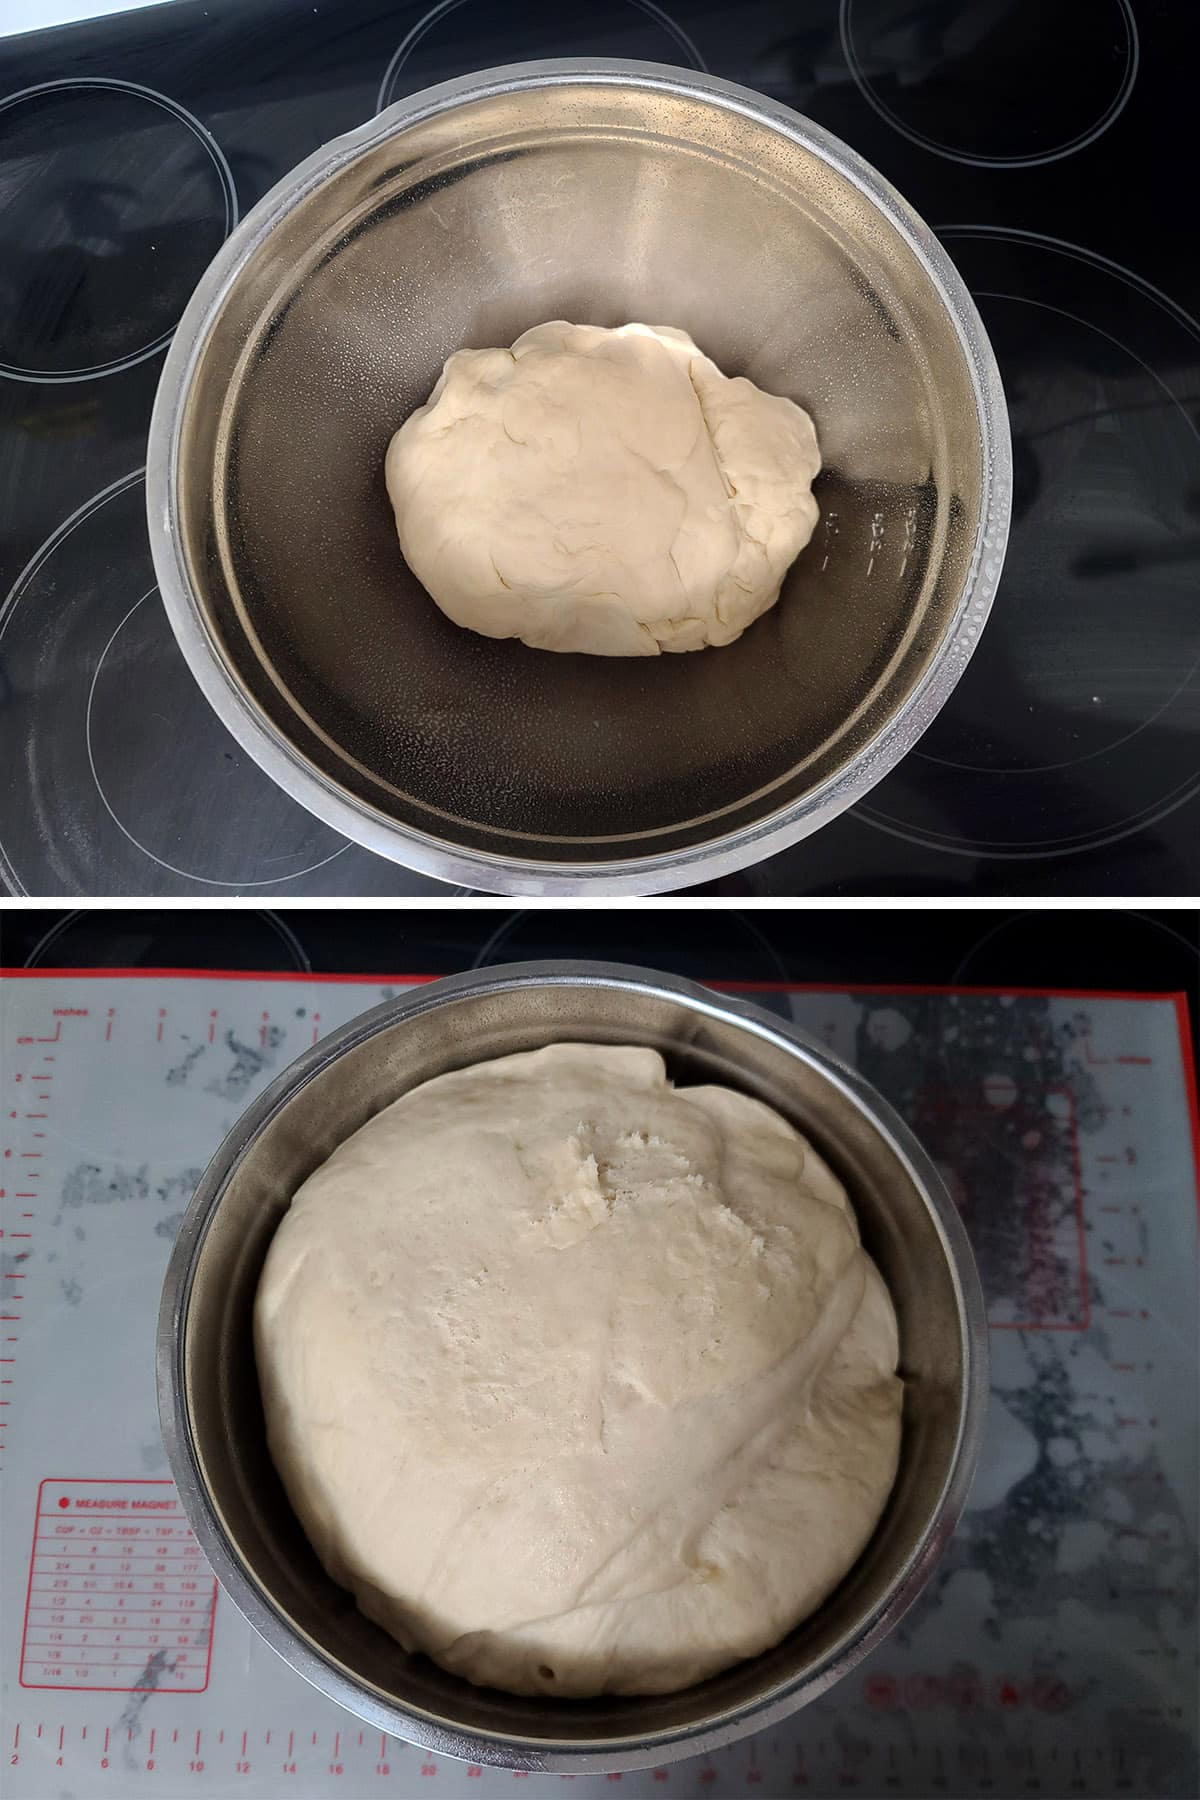 A 2 part image showing the ball of pretzel dough before and after doubling in size.